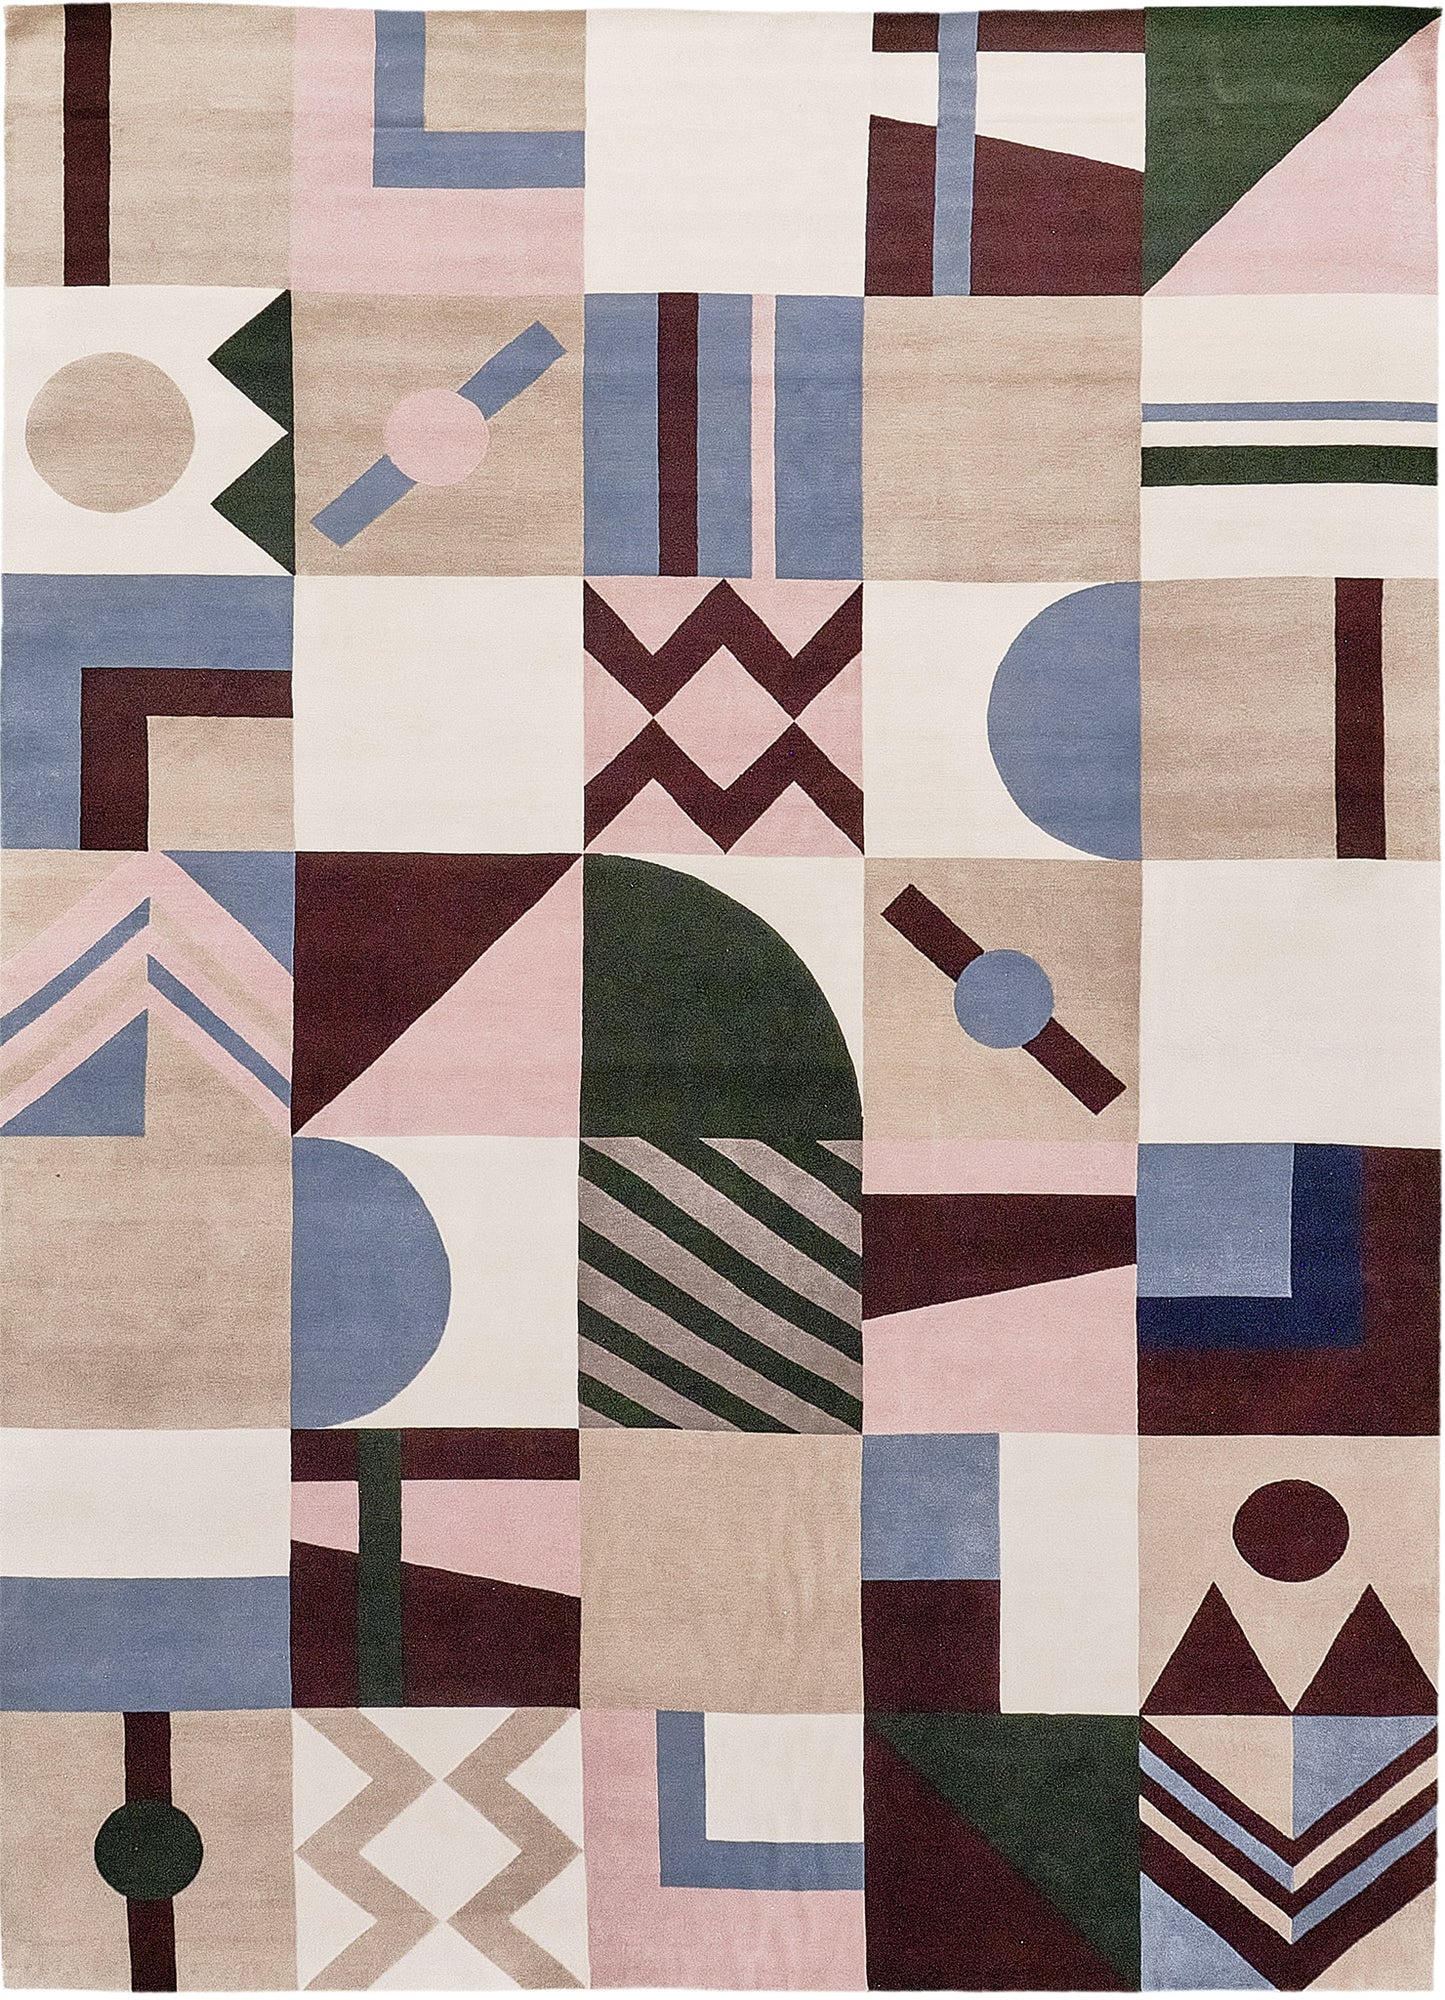 Modern Rug Image 9197 Pazzo, Baci Collection by Citizen Artist